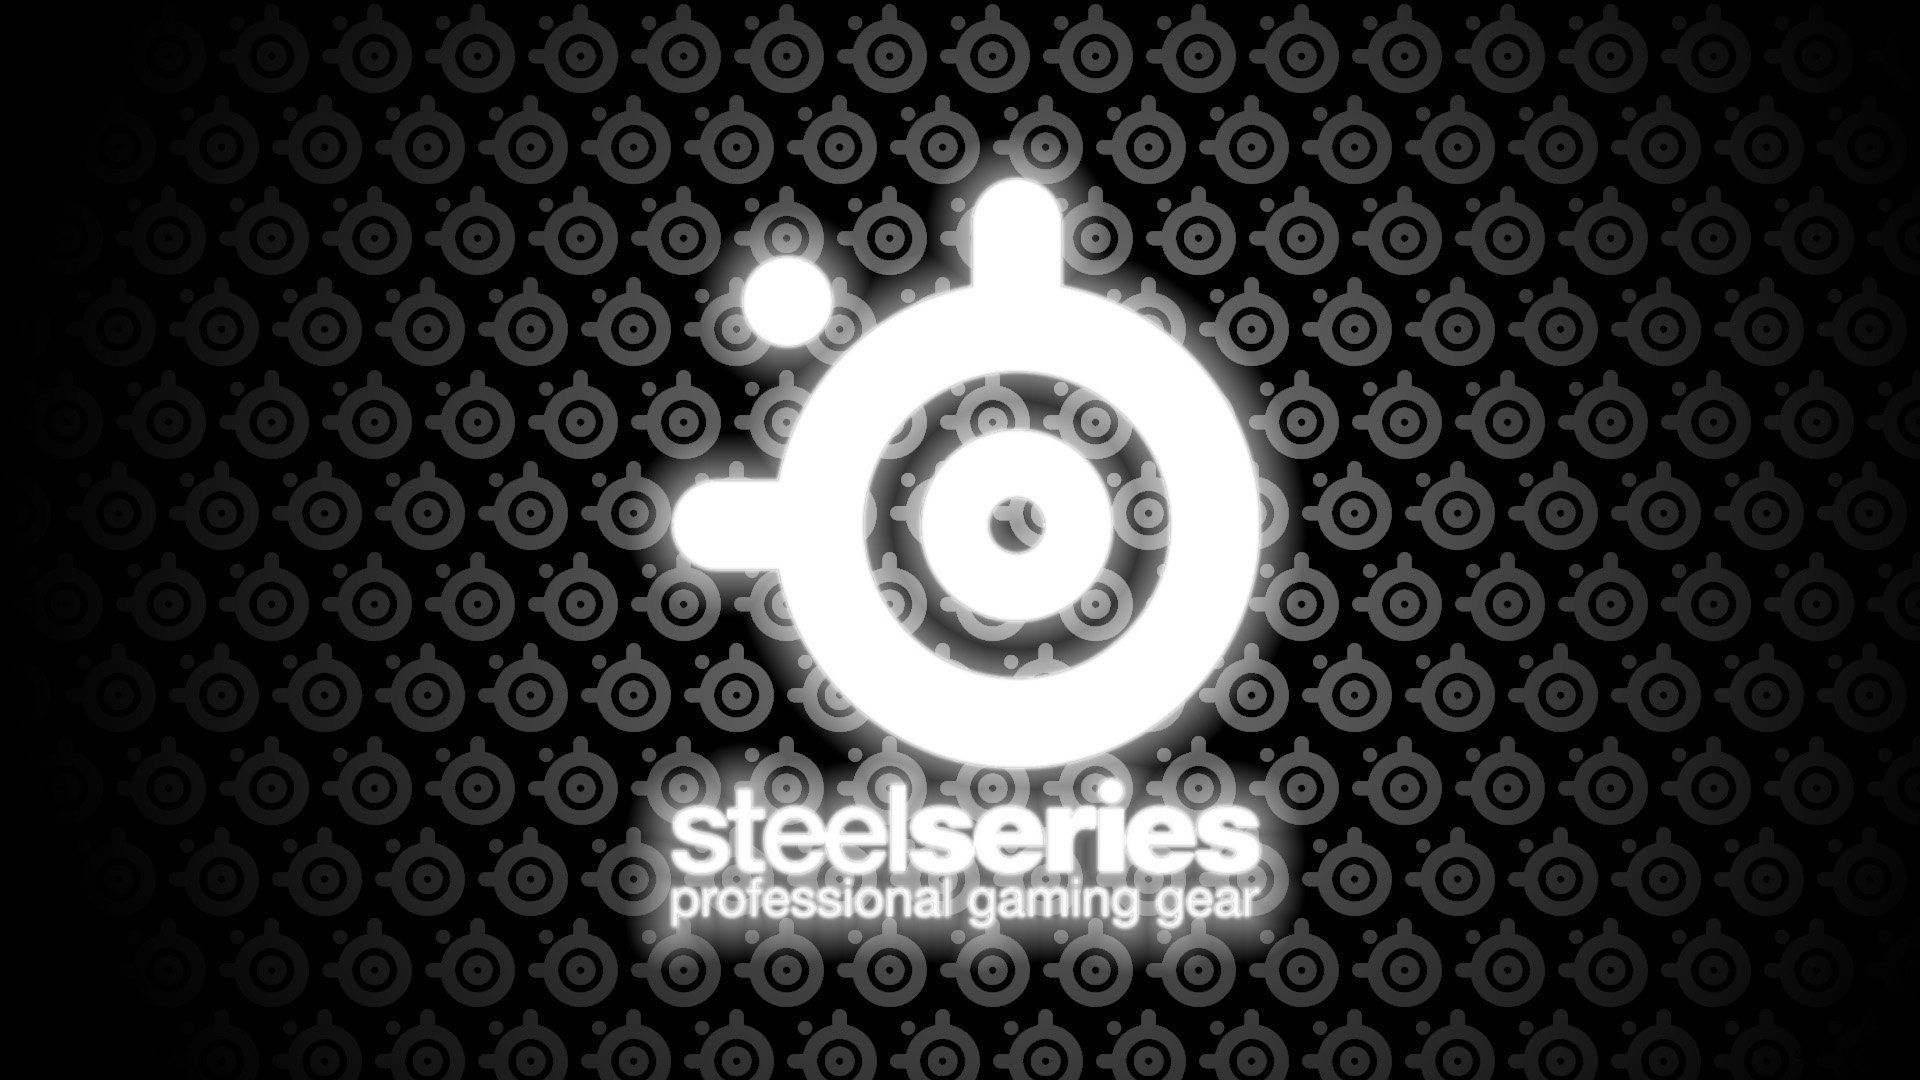 STEELSERIES Gaming computer wr wallpaper 1920x1080 401475